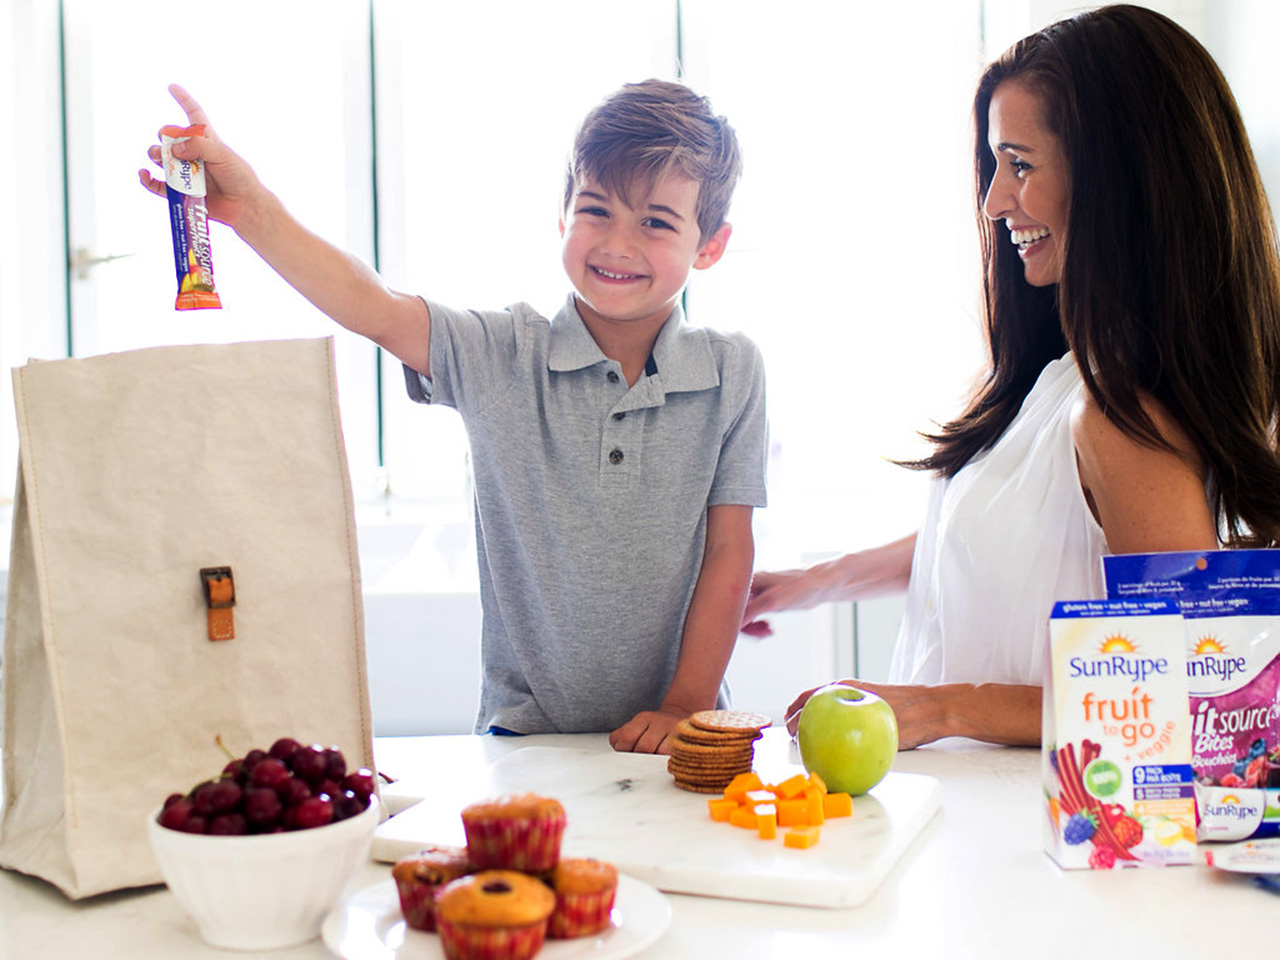 Top kids lunch snack ideas for the back-to-school season